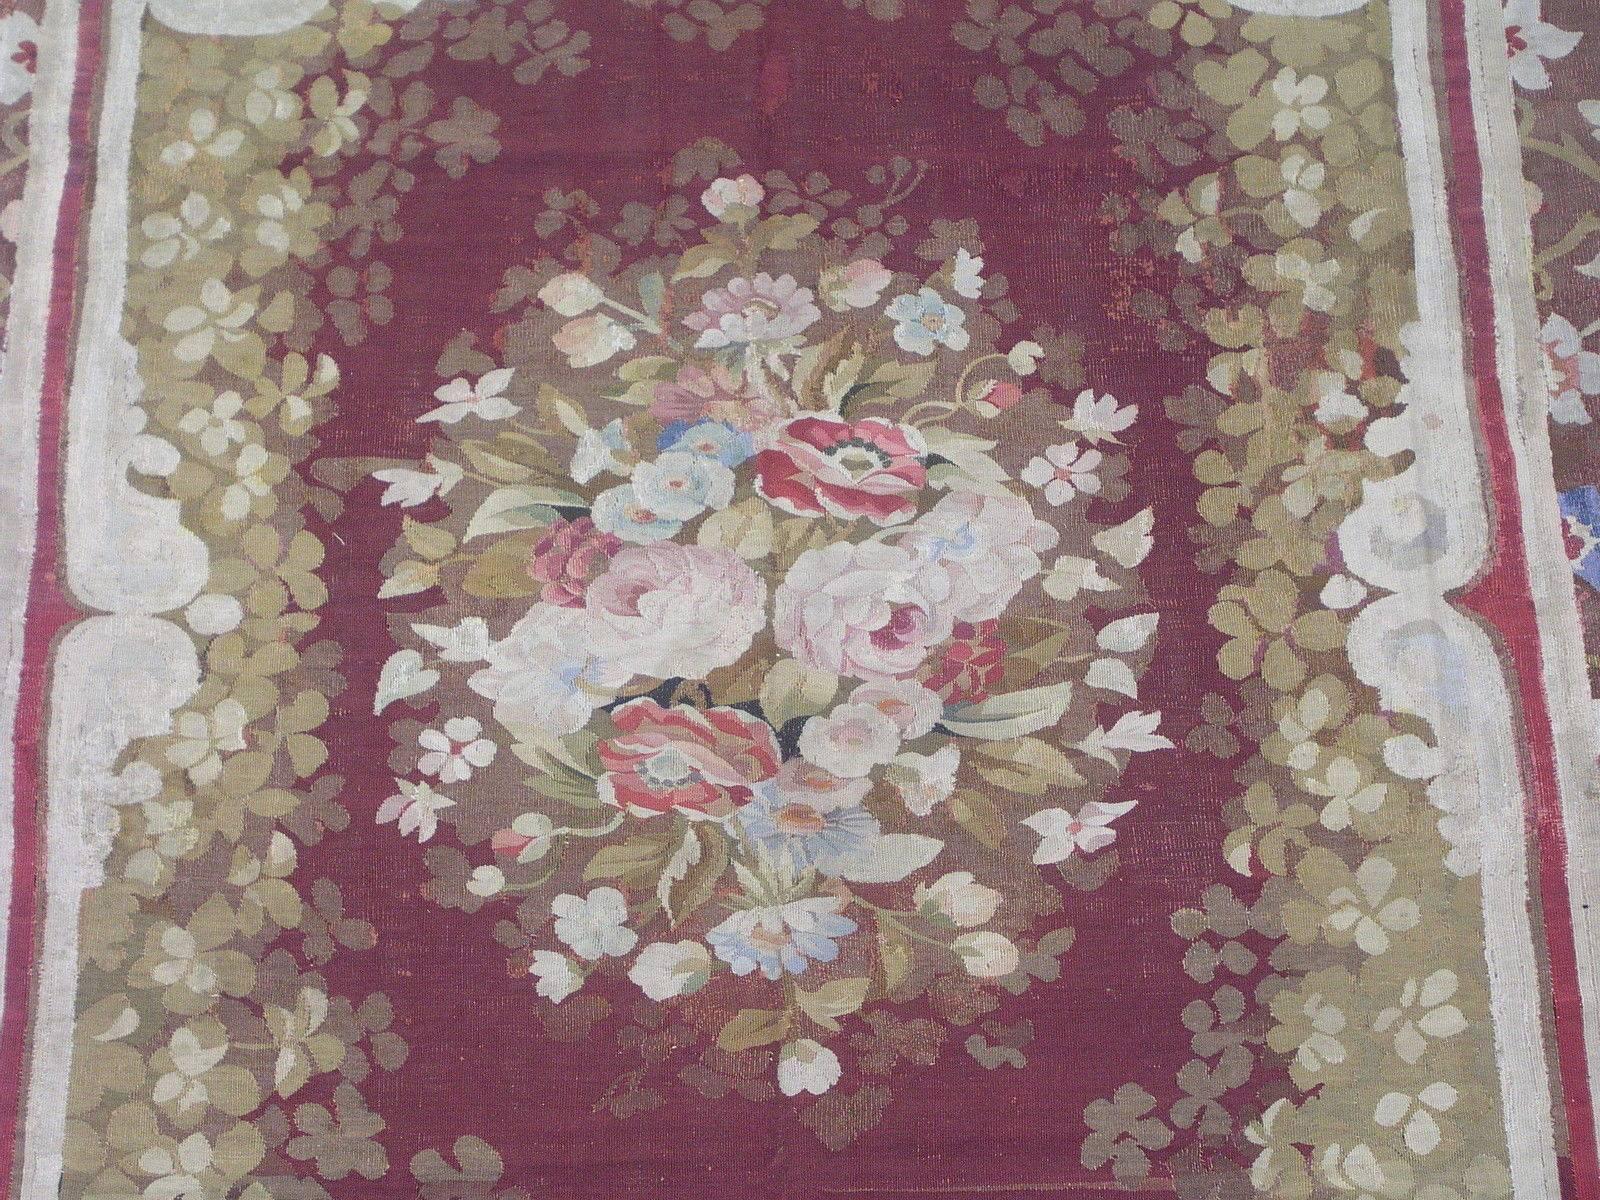 Antique French Aubusson rug with floral design

circa 1880

Measure: 8' 3